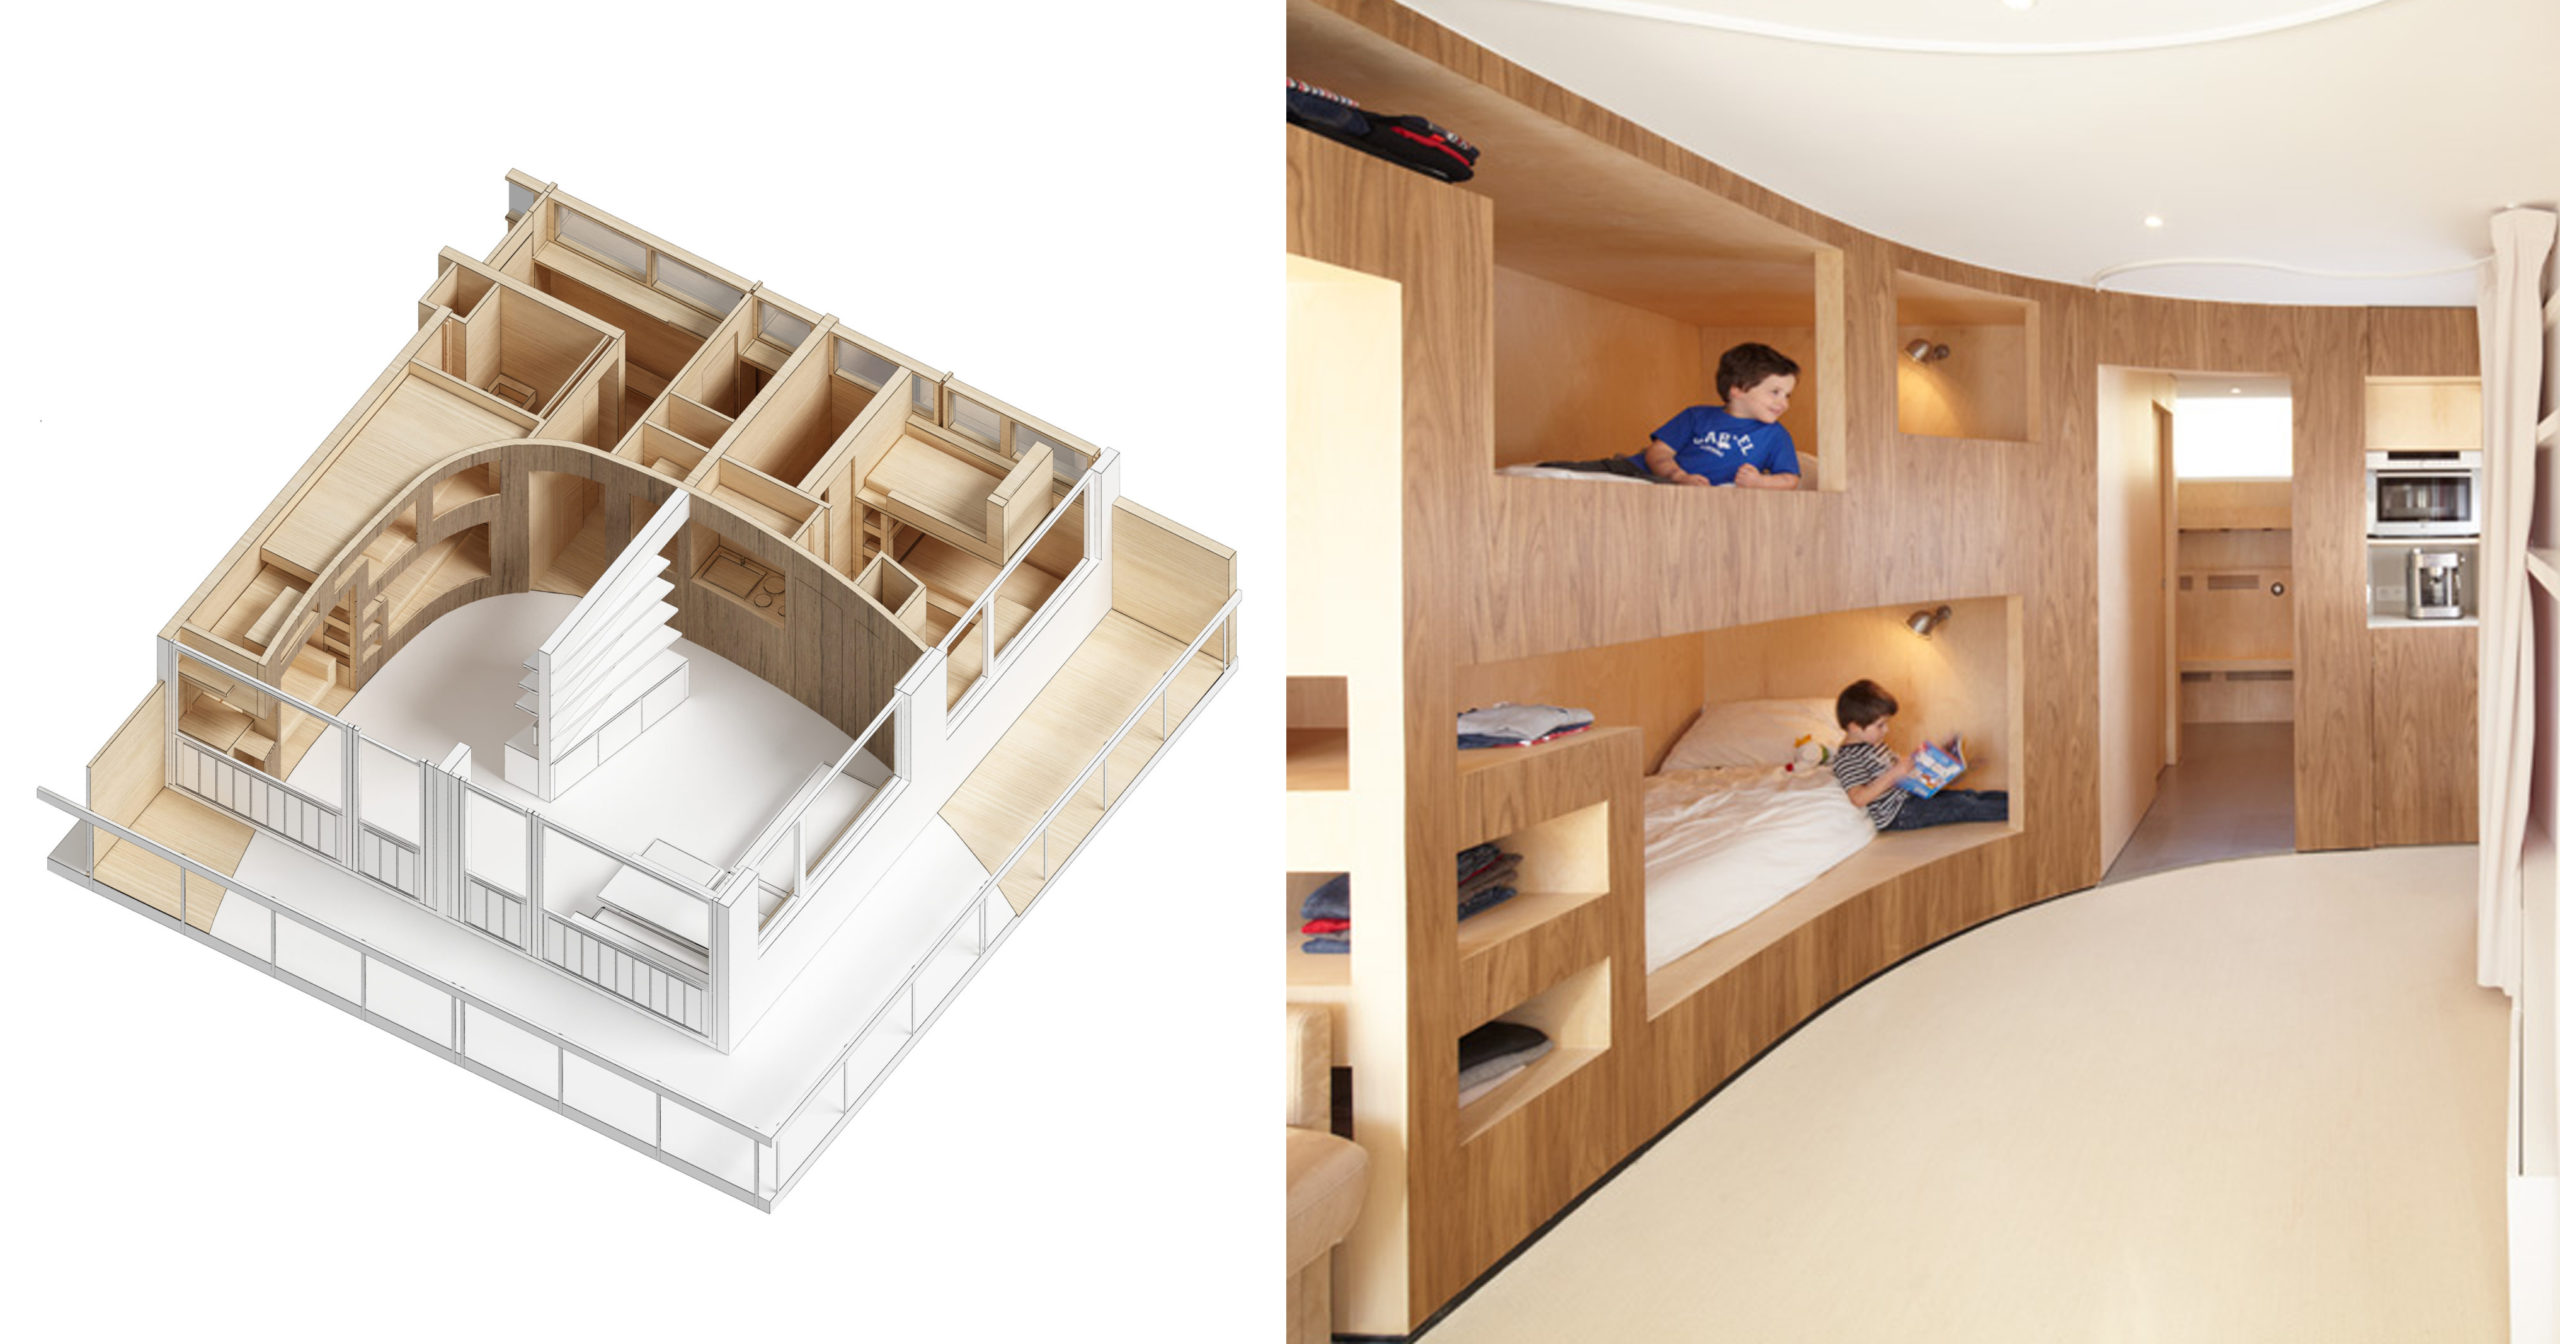 https://blog.architizer.com/wp-content/uploads/clever-storage-solutions-scaled.jpg